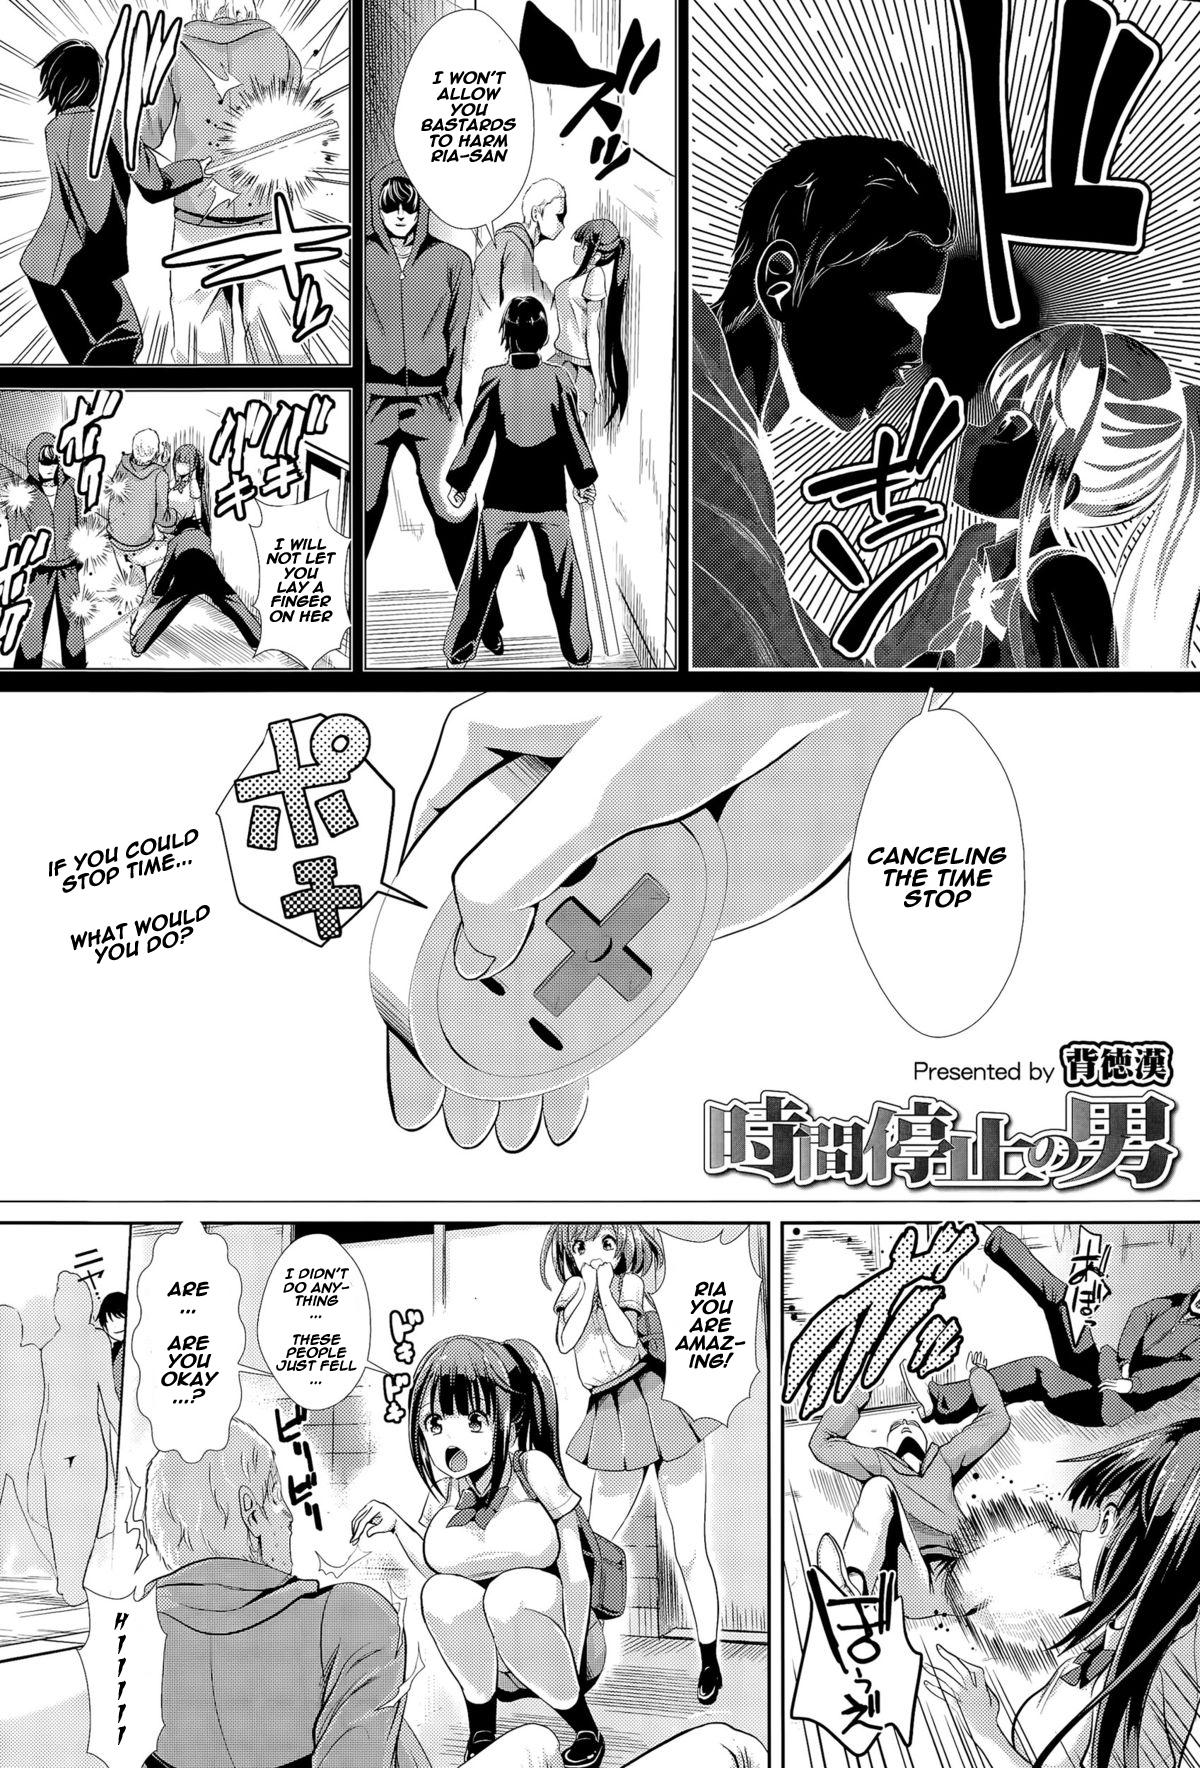 Pickup Jikan Teishi no Otoko | The journal of the man who could stop time Best Blowjob - Page 2